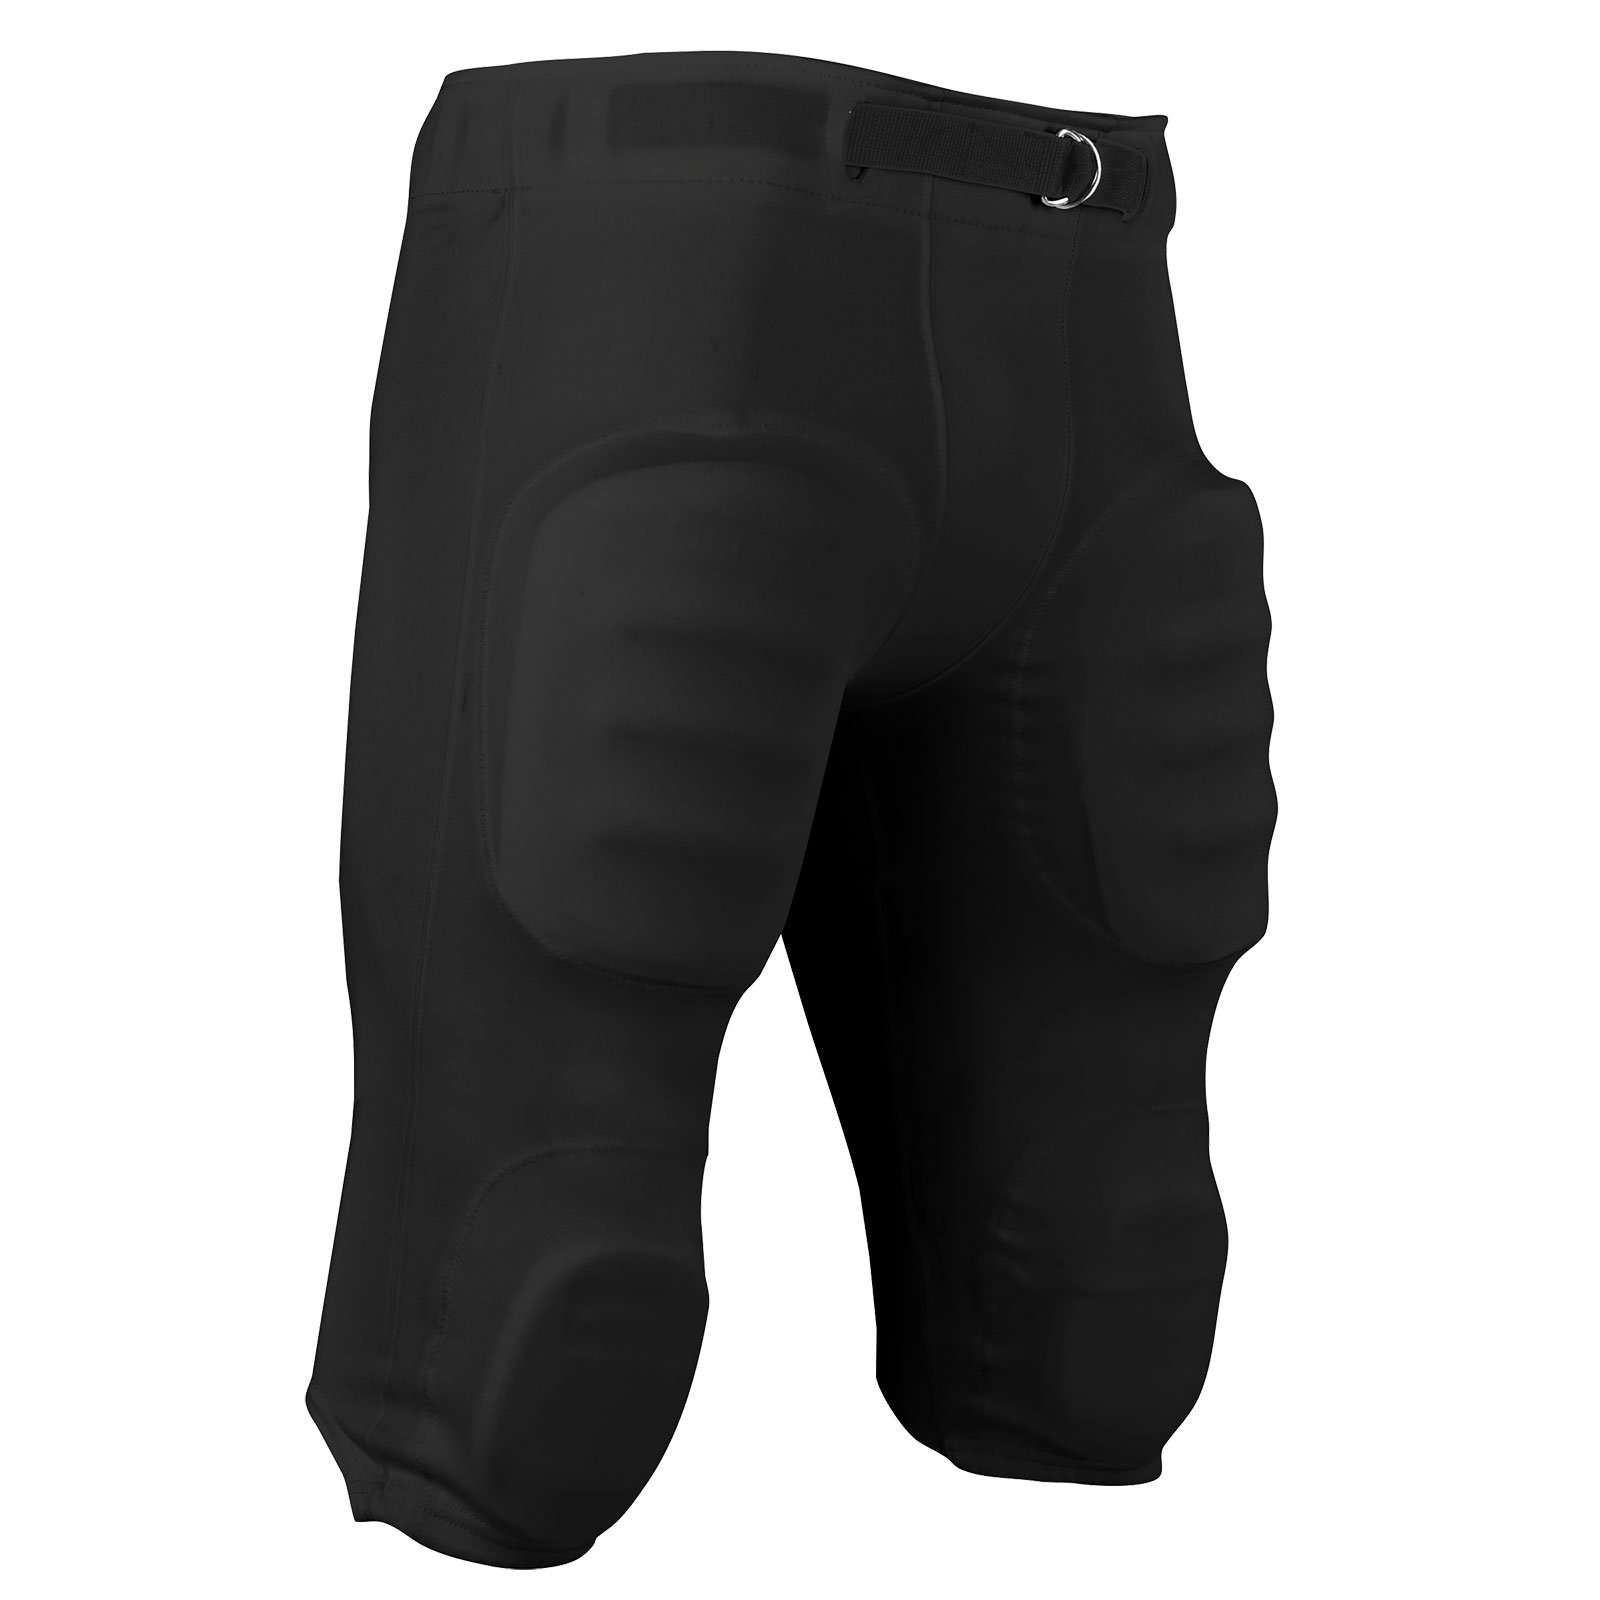 Youth Football Practice Pants